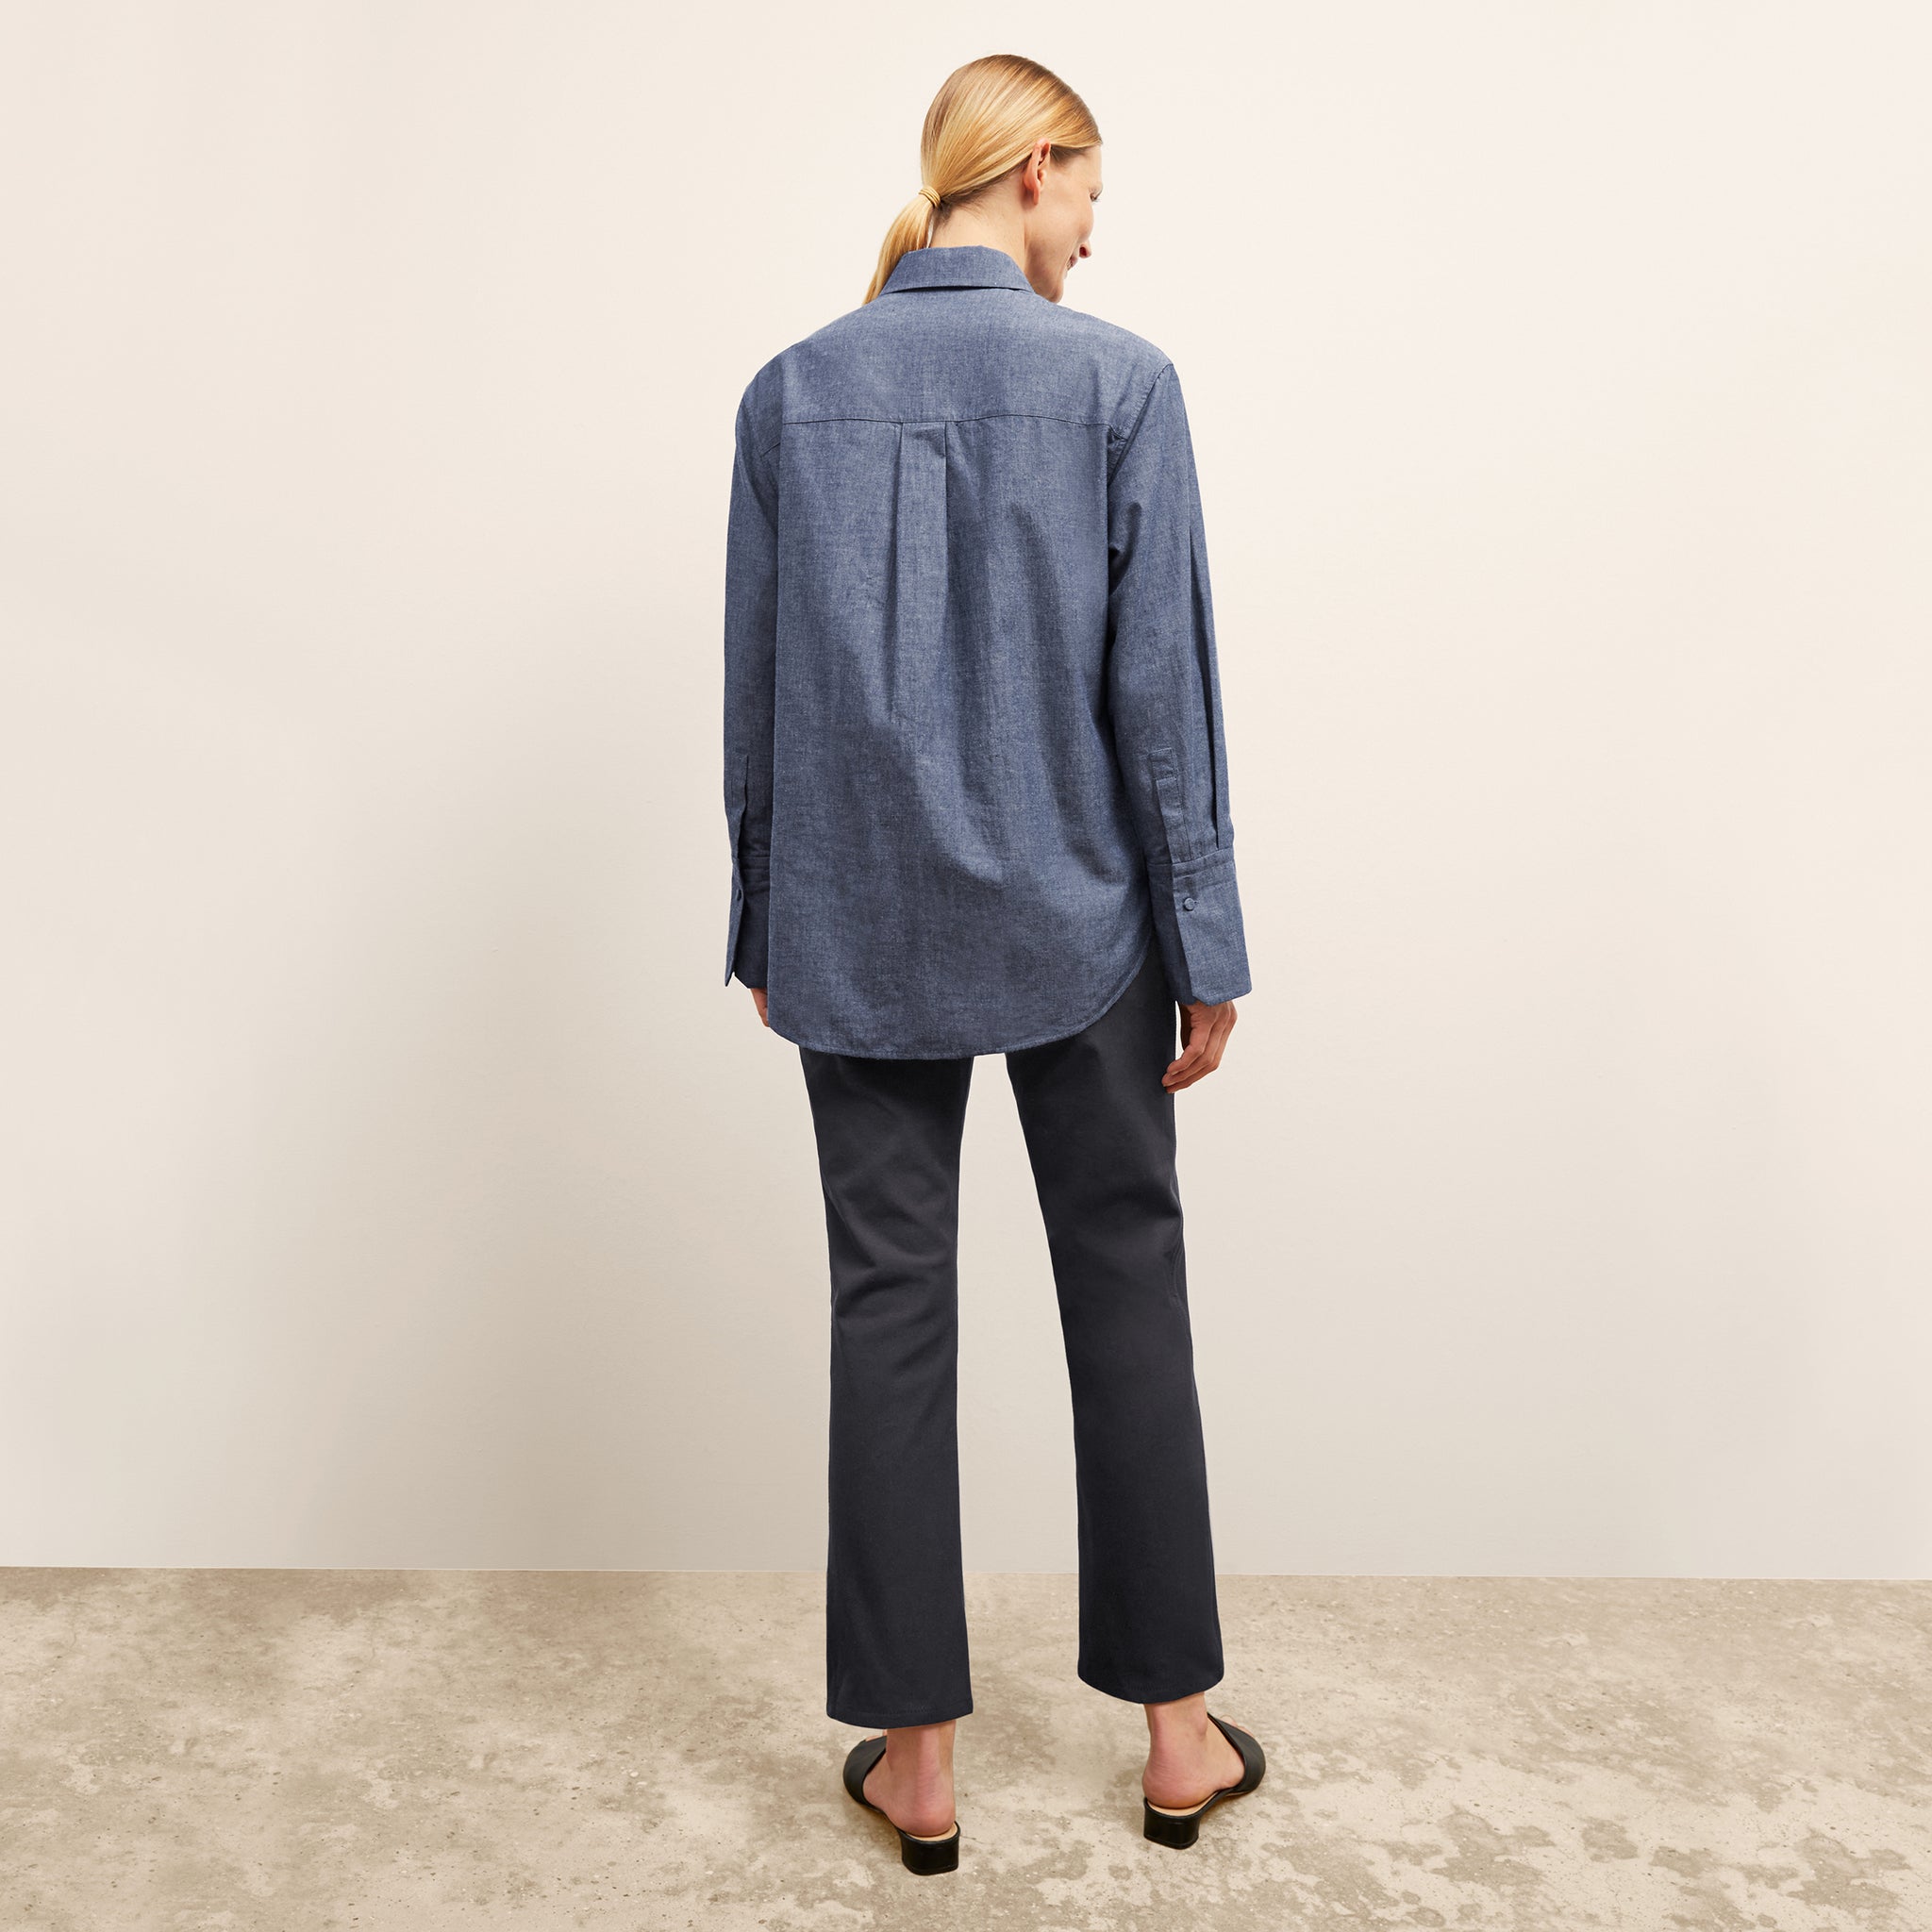 back image of a woman wearing the siobhan top in clear blue